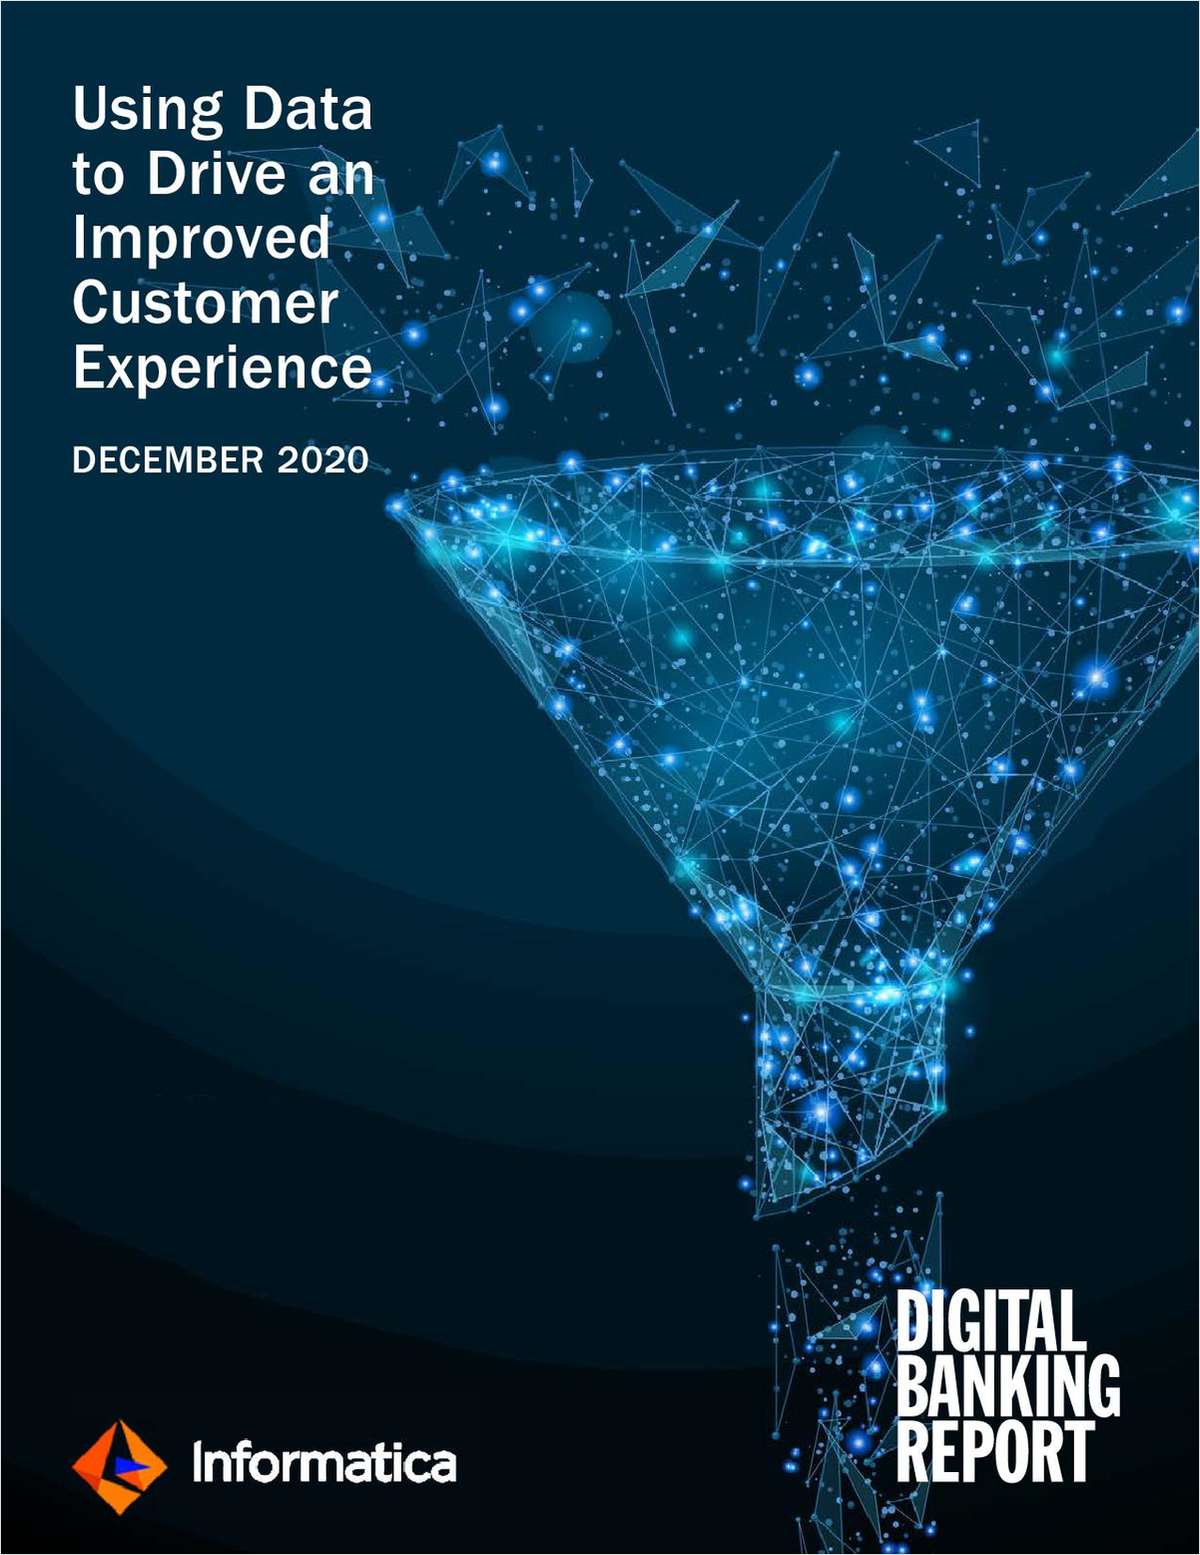 Using Data to Drive an Improved CX by Digital Banking Report